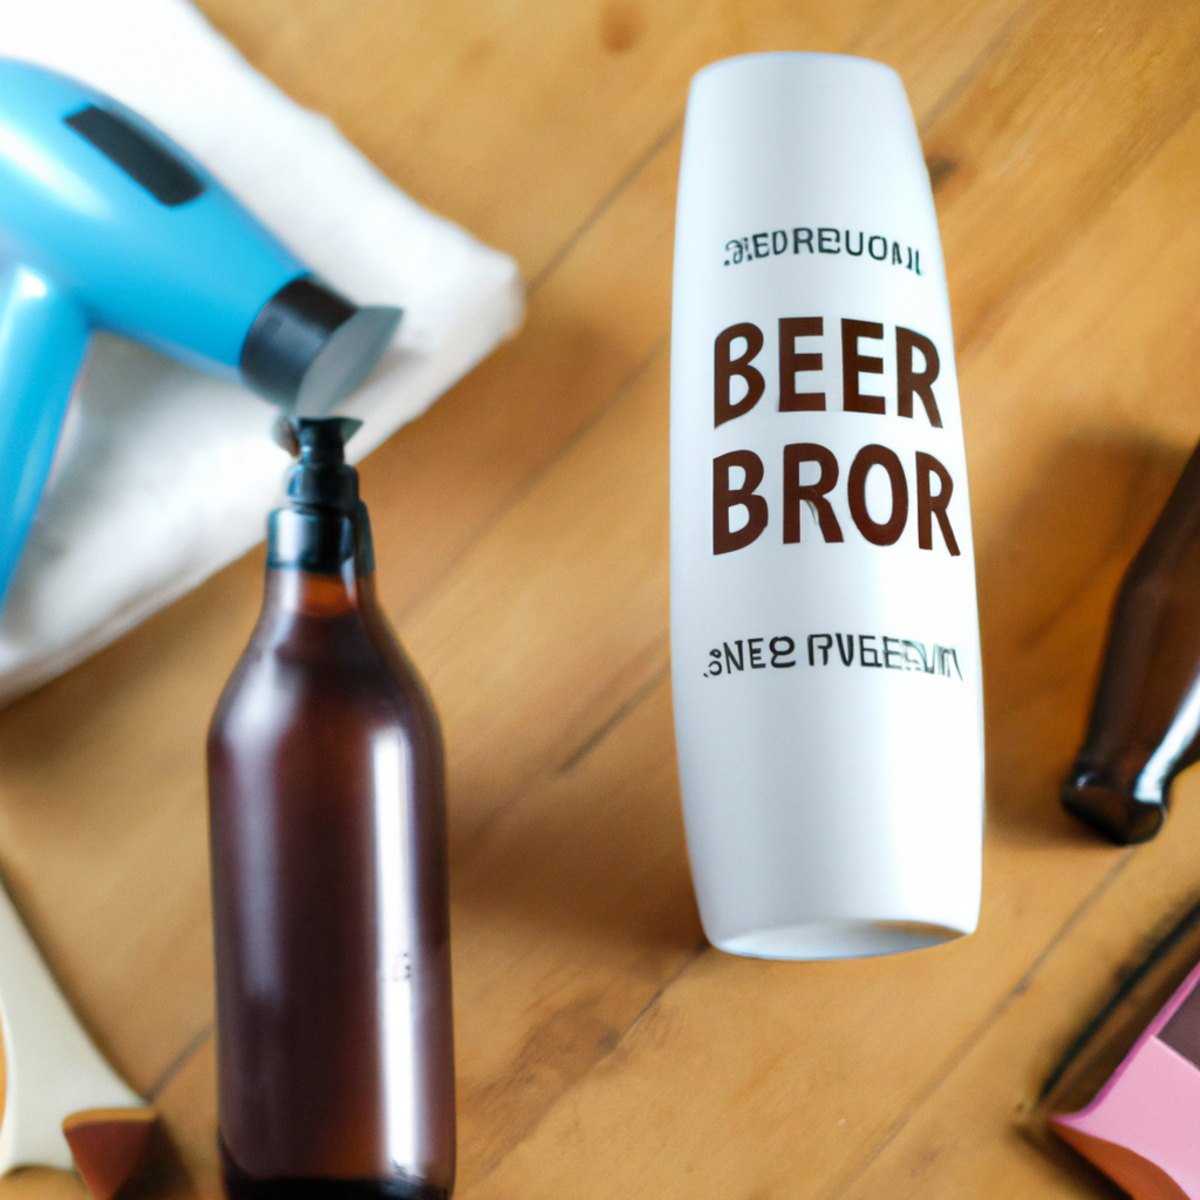 Hair care products and a bottle of beer on a wooden table.